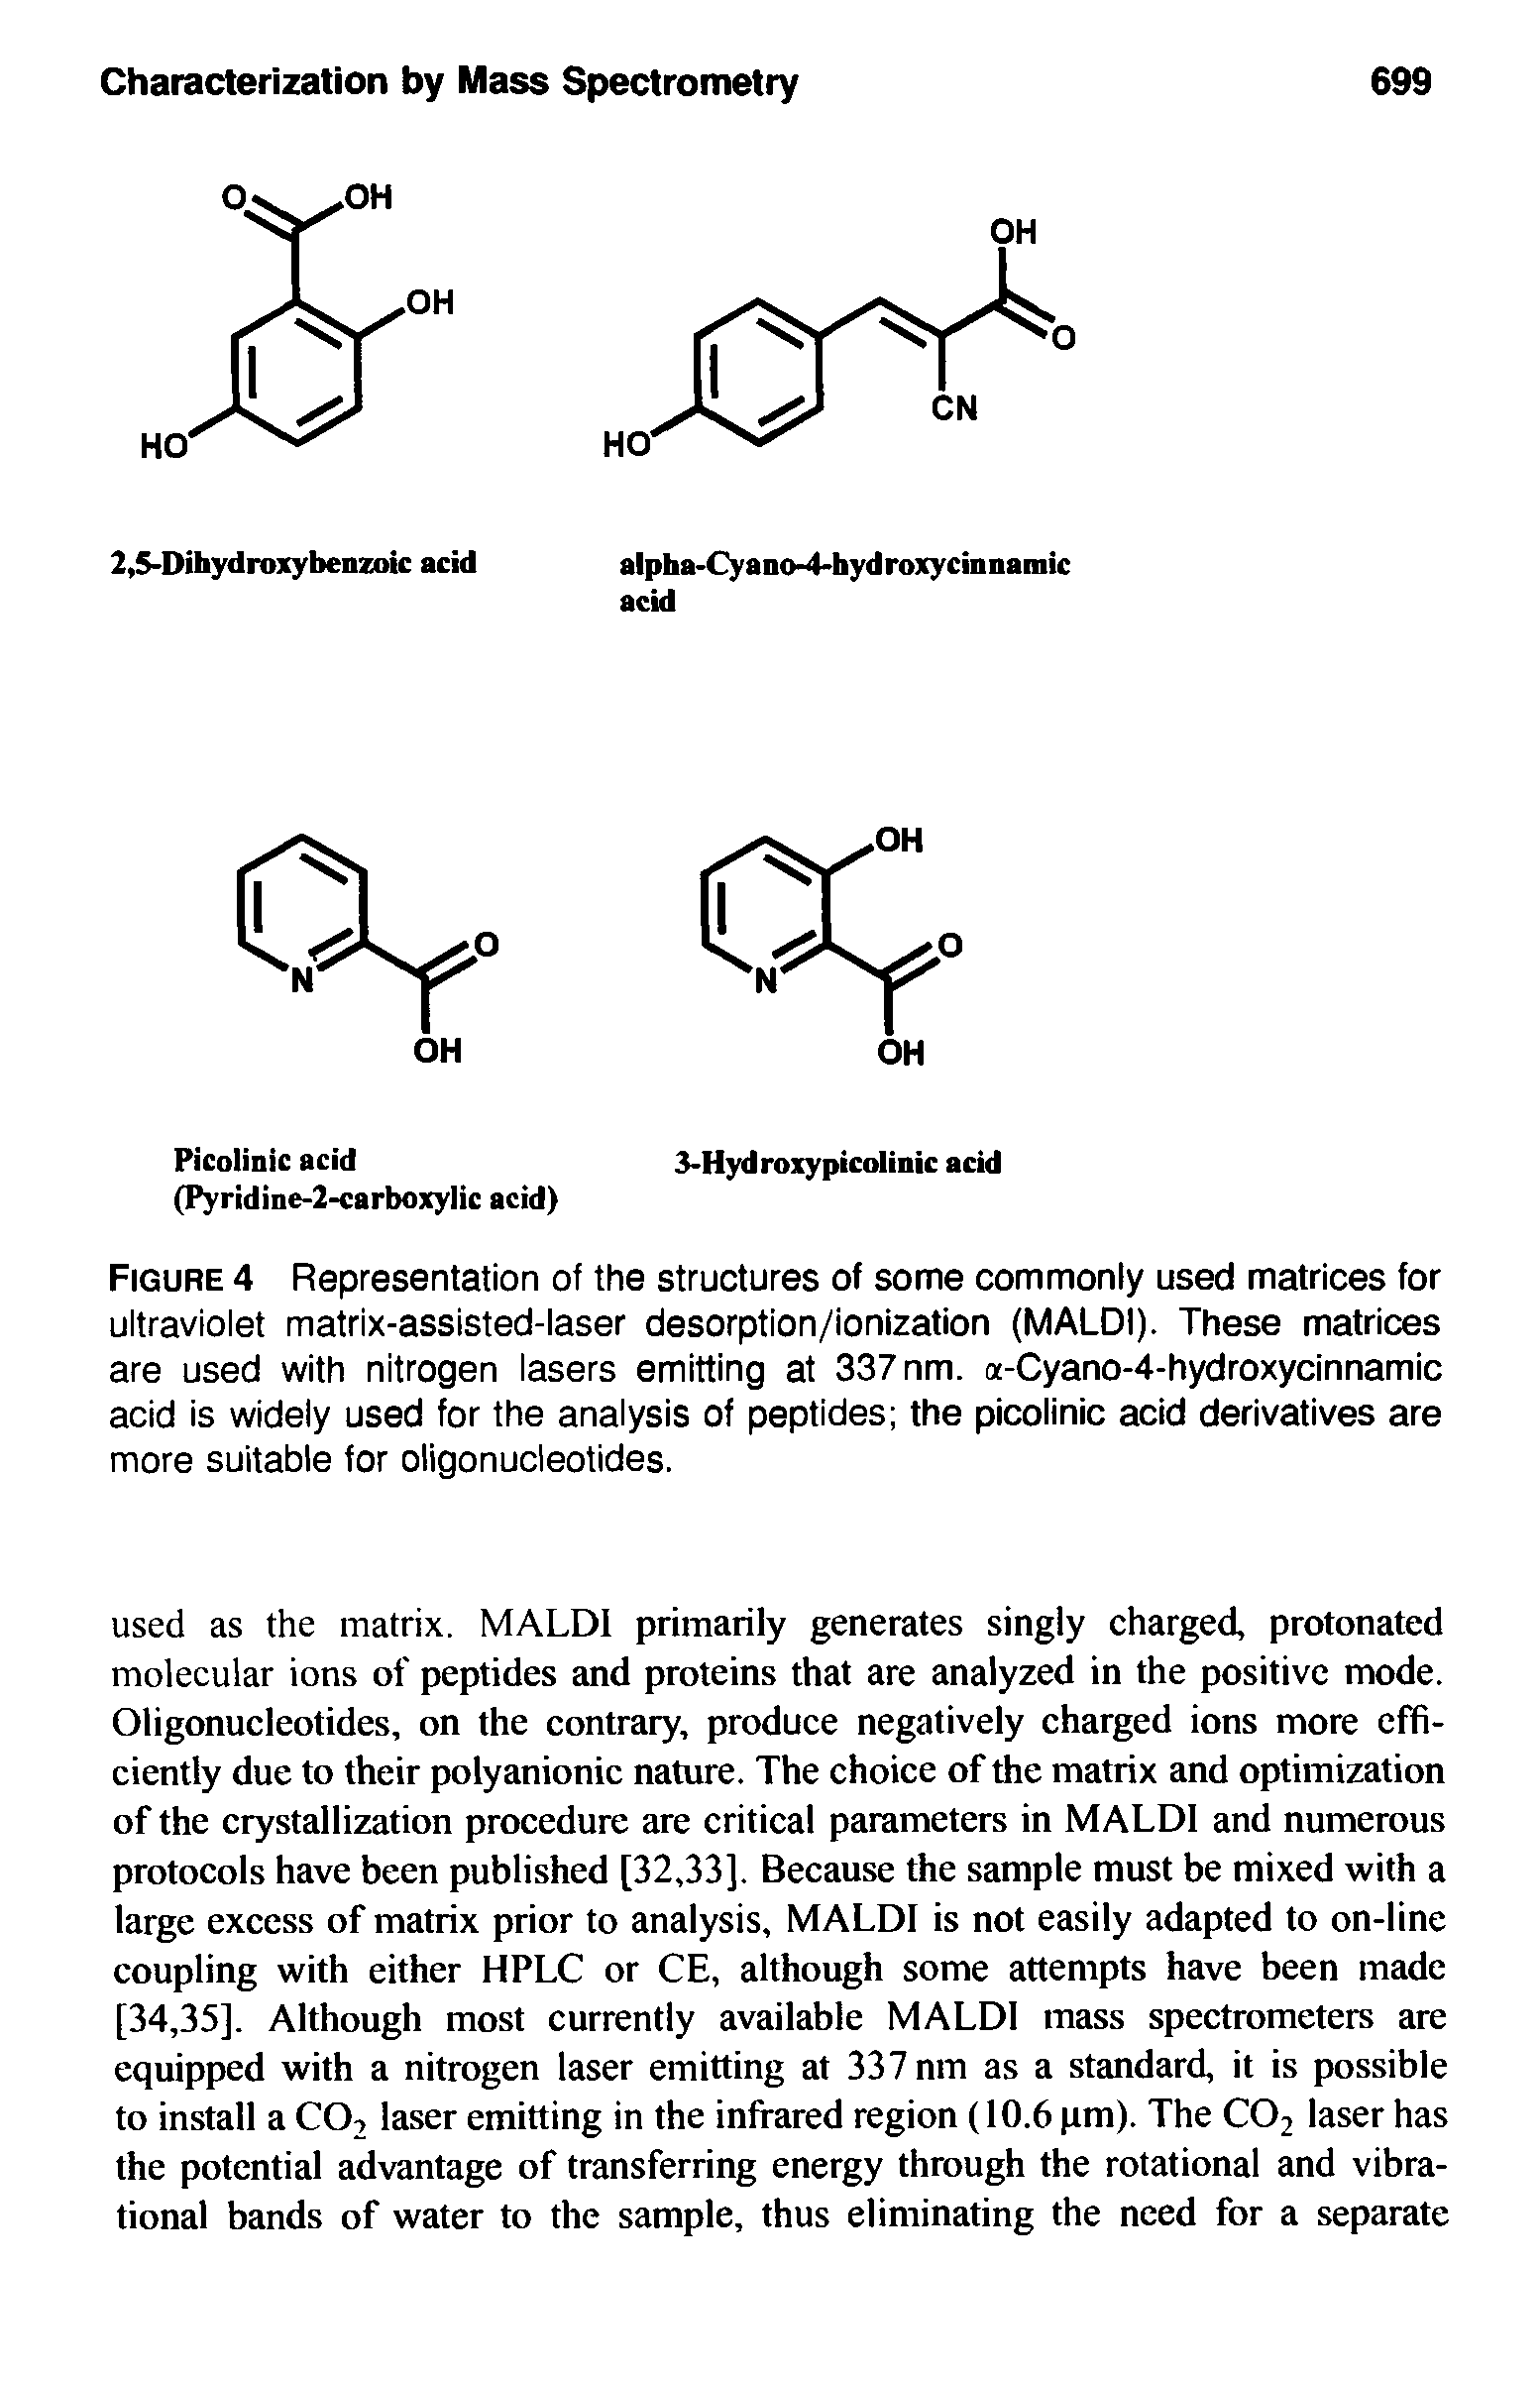 Figure 4 Representation of the structures of some commonly used matrices for ultraviolet matrix-assisted-laser desorption/ionization (MALDI). These matrices are used with nitrogen lasers emitting at 337 nm. a-Cyano-4-hydroxycinnamic acid is widely used for the analysis of peptides the picolinic acid derivatives are more suitable for oligonucleotides.